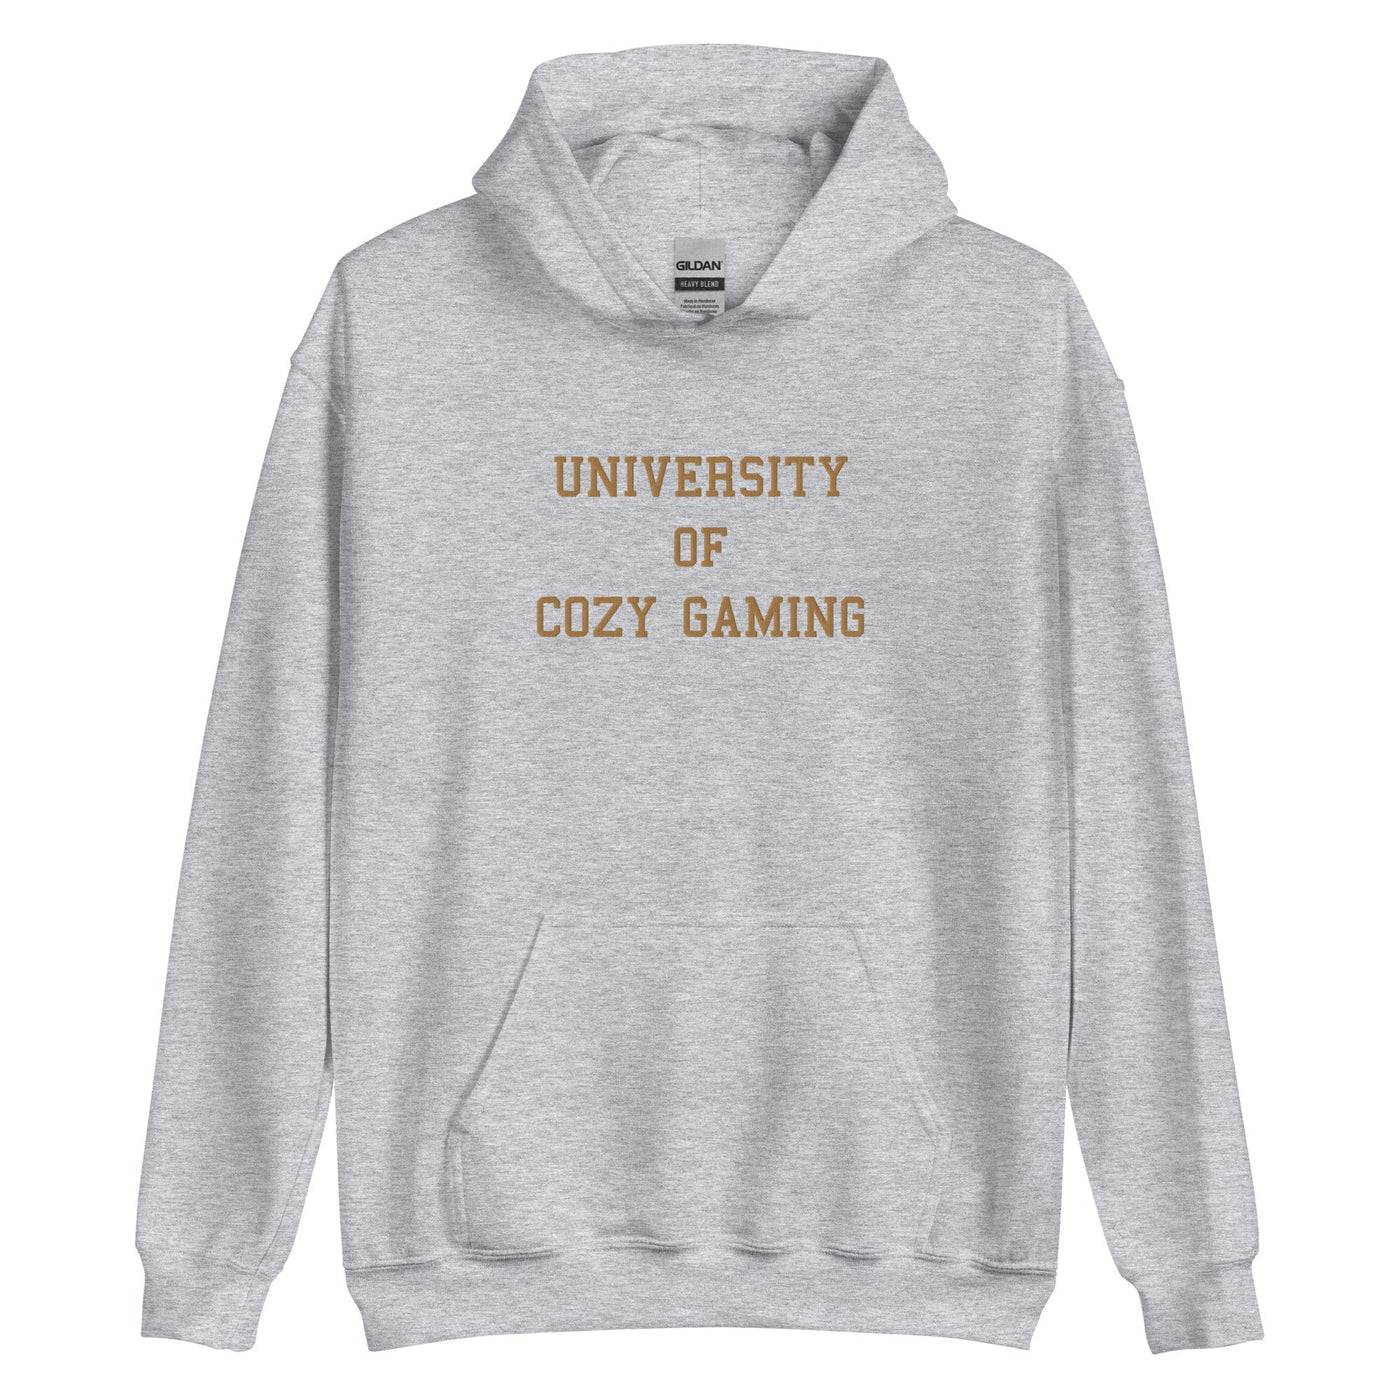 University of Cozy Gaming | Embroidered Unisex Hoodie | Cozy Gamer Threads and Thistles Inventory Sport Grey S 